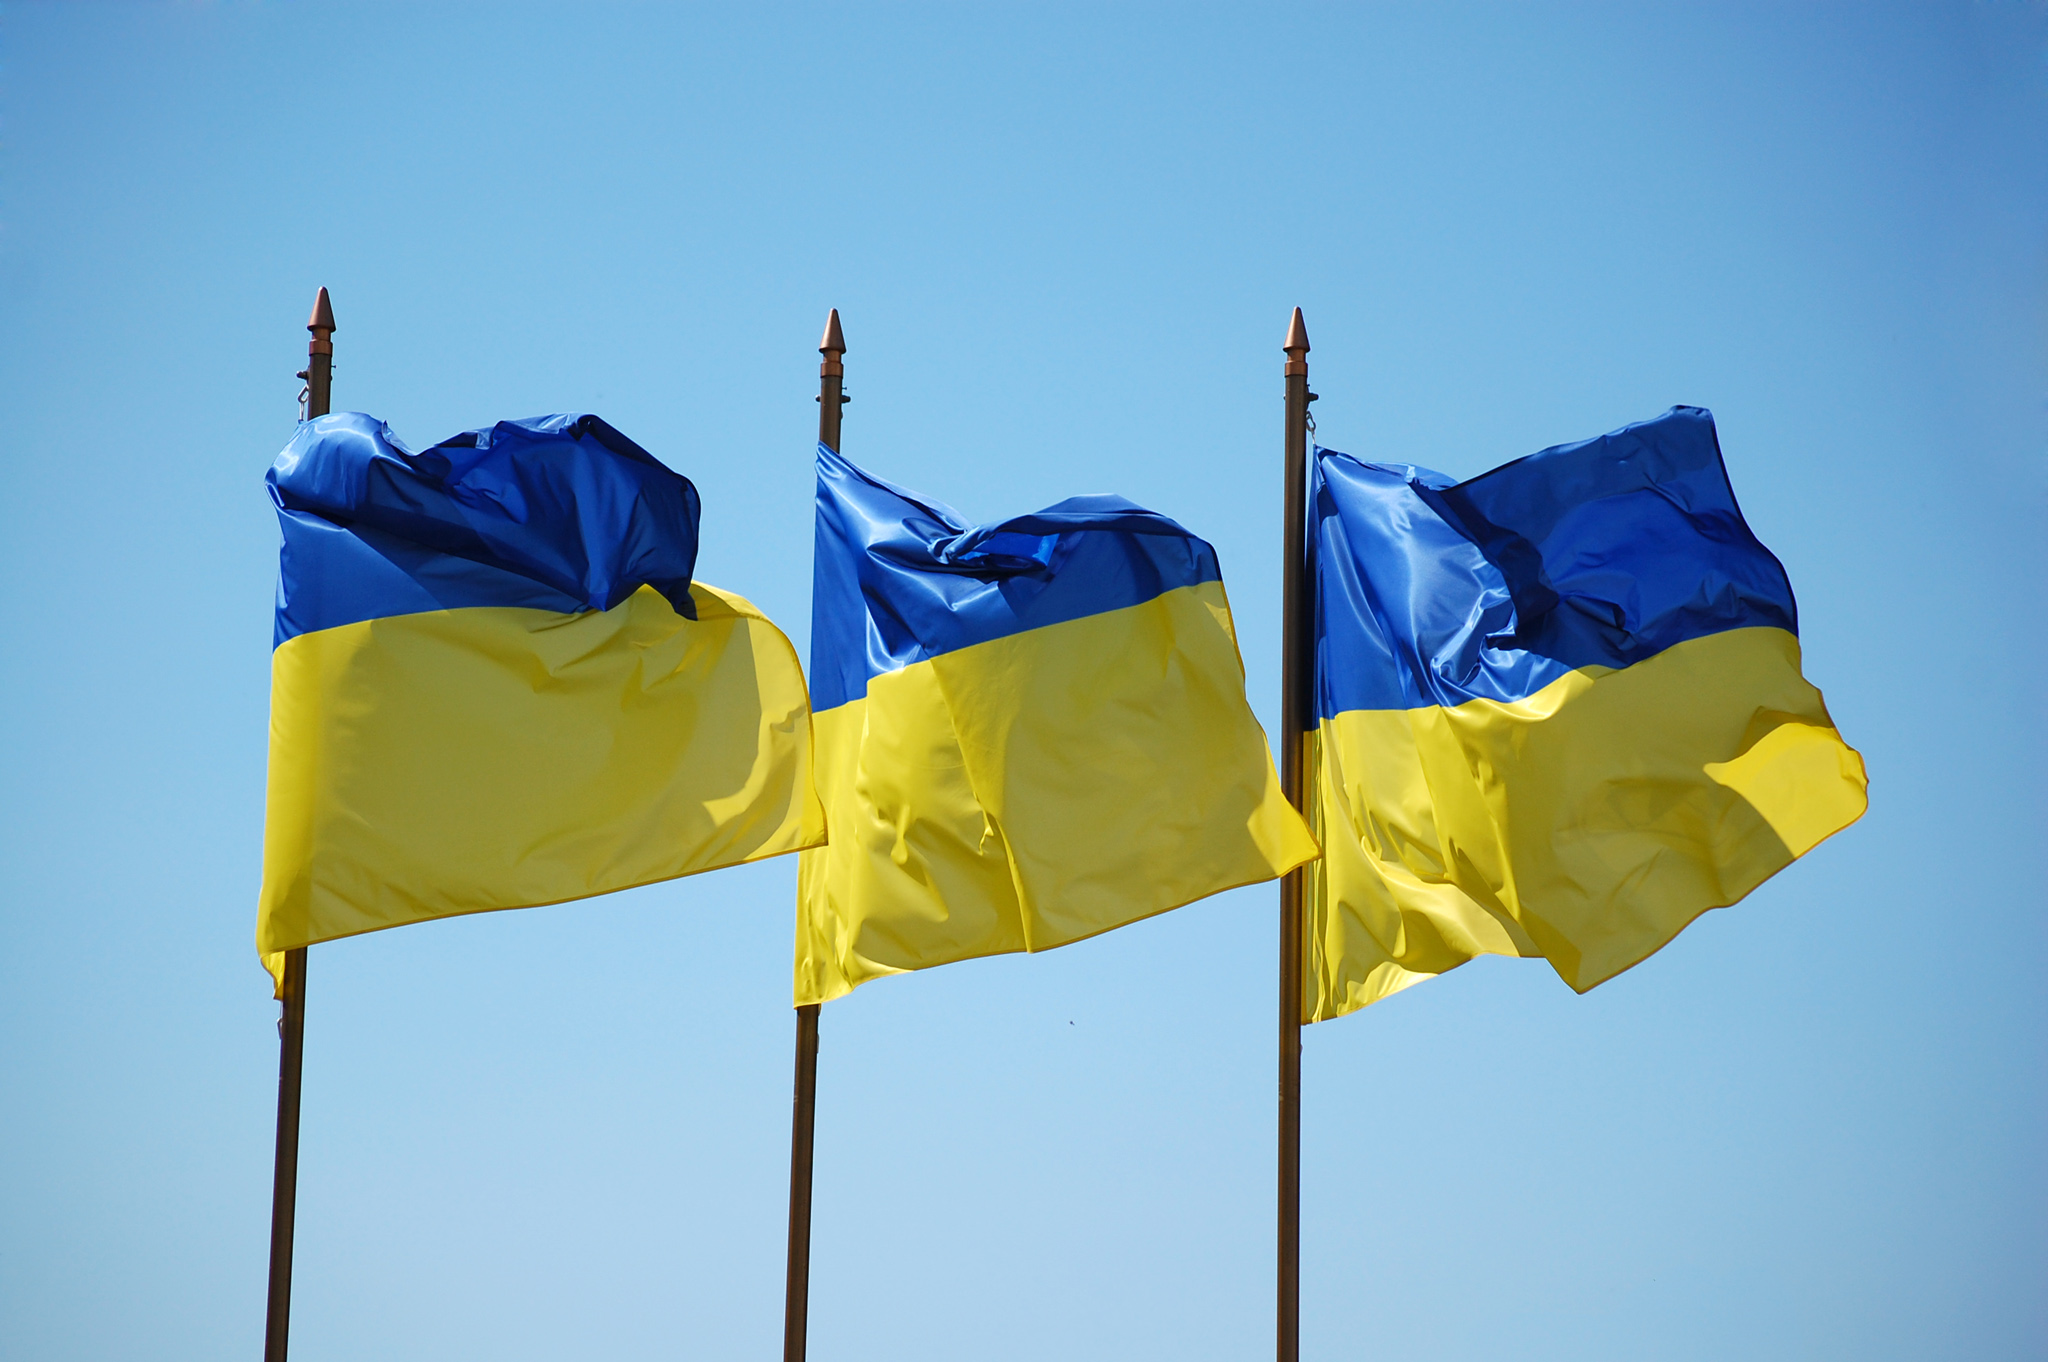 POLL: Majority of Dems Prioritize Ukraine Border Security Over Their Own